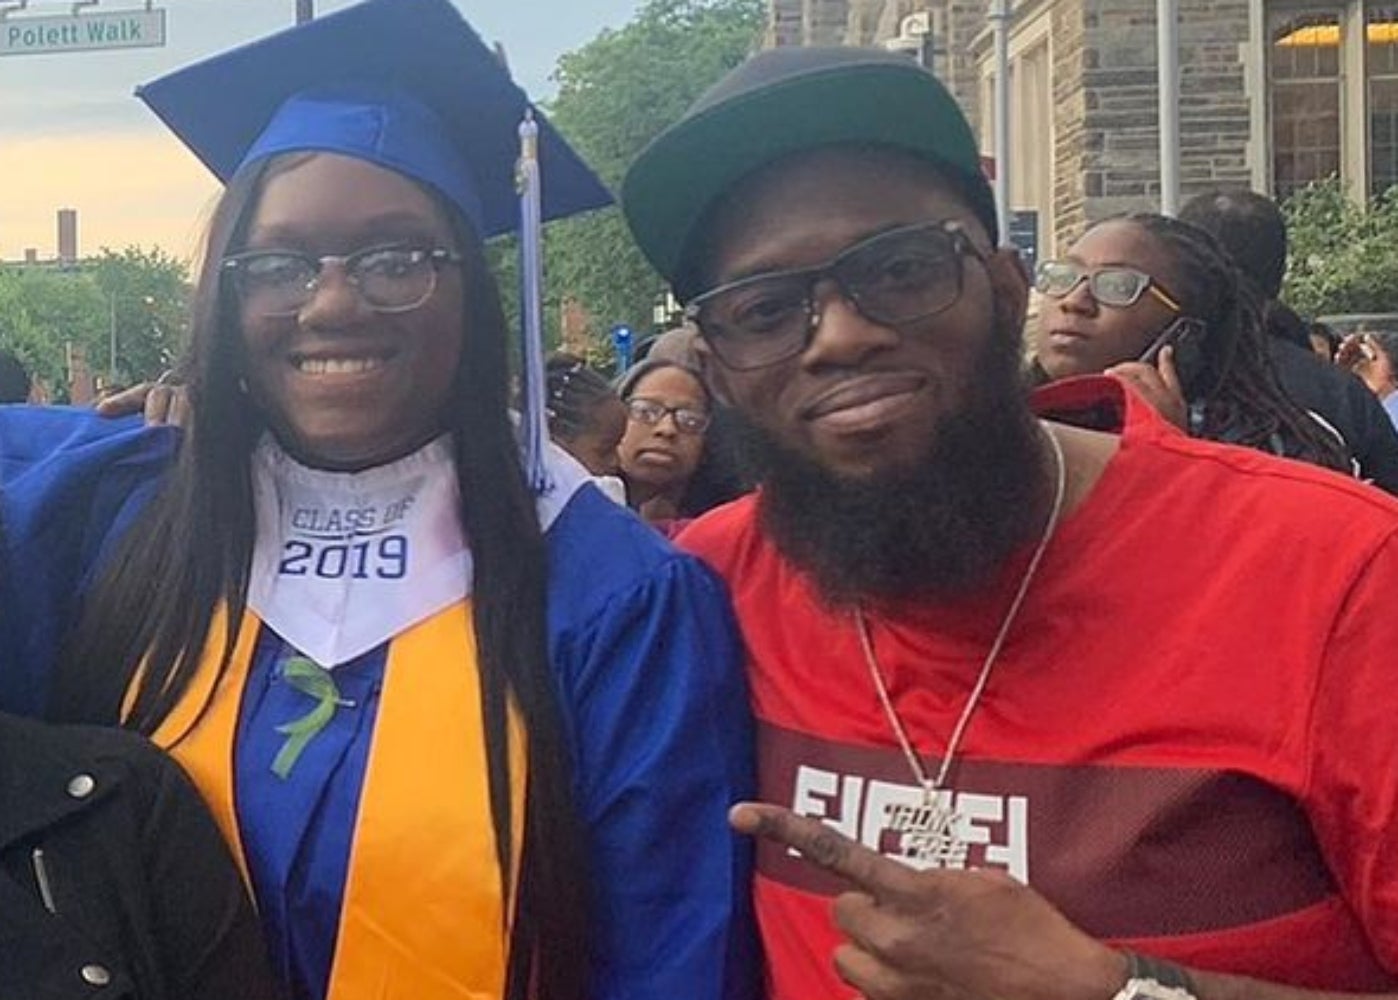 Rapper Freeway's 21-Year-Old Daughter Passes Away After Cancer Battle: 'This Pain Is Unimaginable'